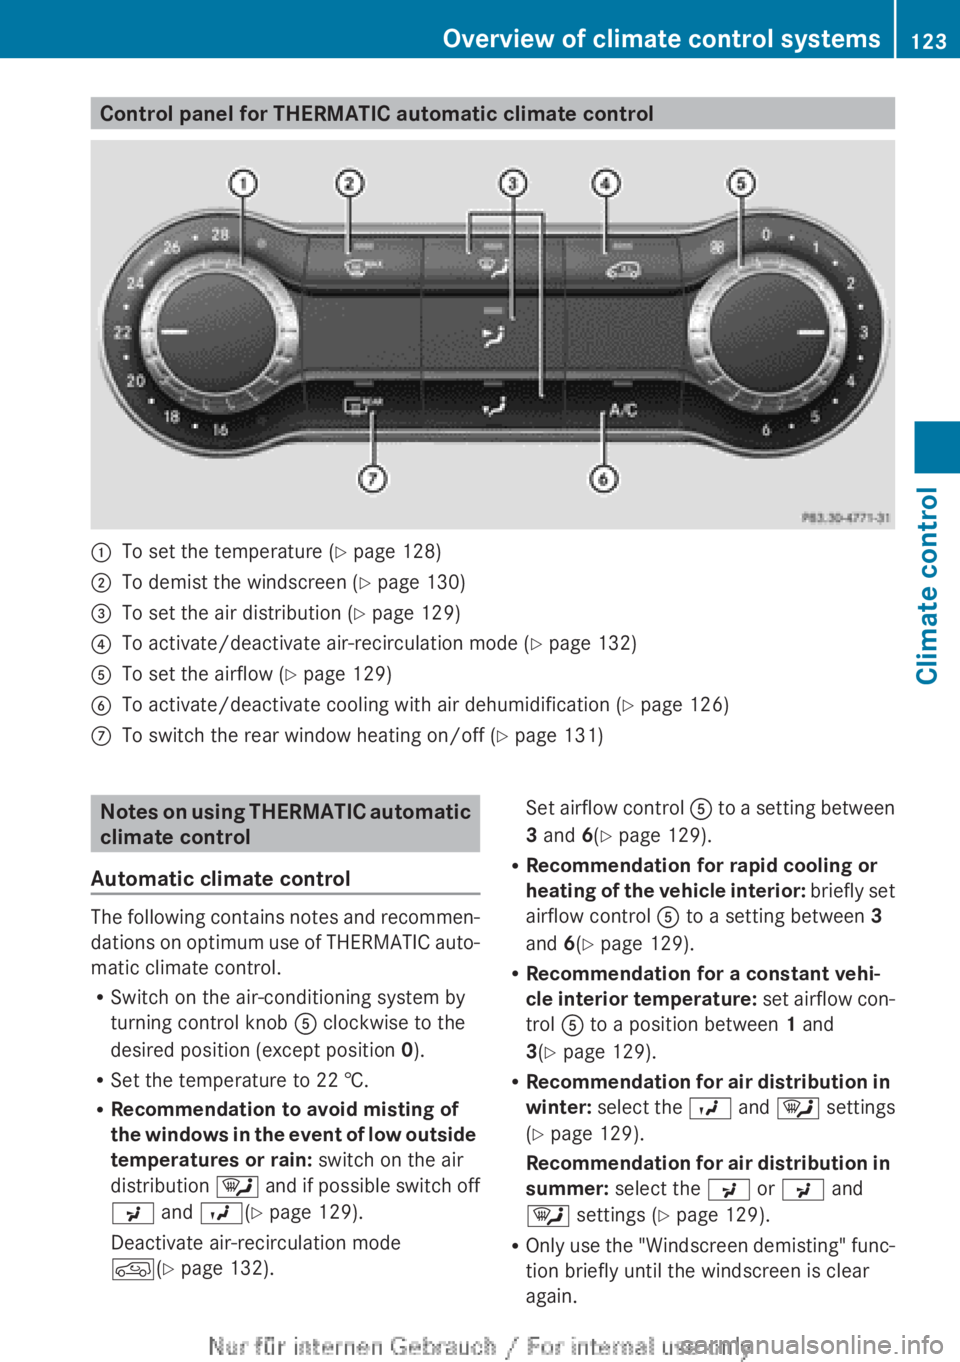 MERCEDES-BENZ A CLASS 2012  Owners Manual Control panel for THERMATIC automatic climate control
:
To set the temperature (Y page 128)
; To demist the windscreen (Y page 130)
= To set the air distribution ( Y page 129)
? To activate/deactivate